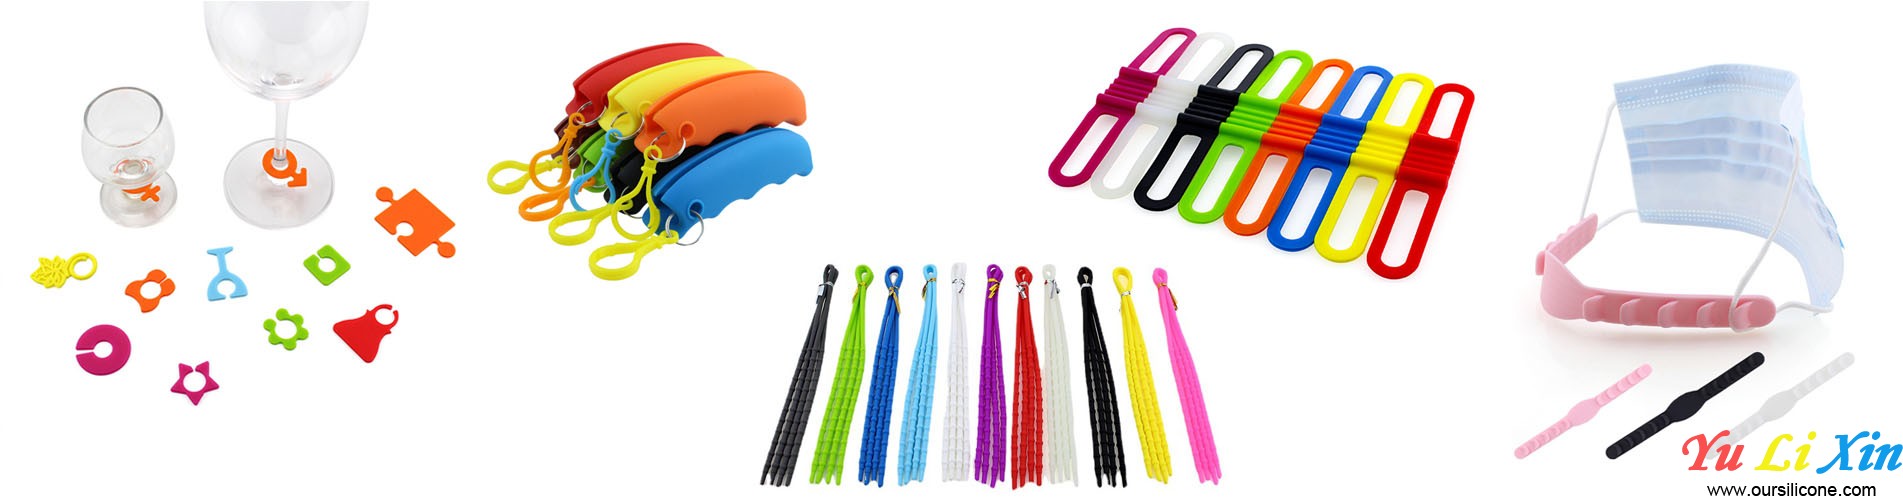 Creative Useful Silicone Daily Products